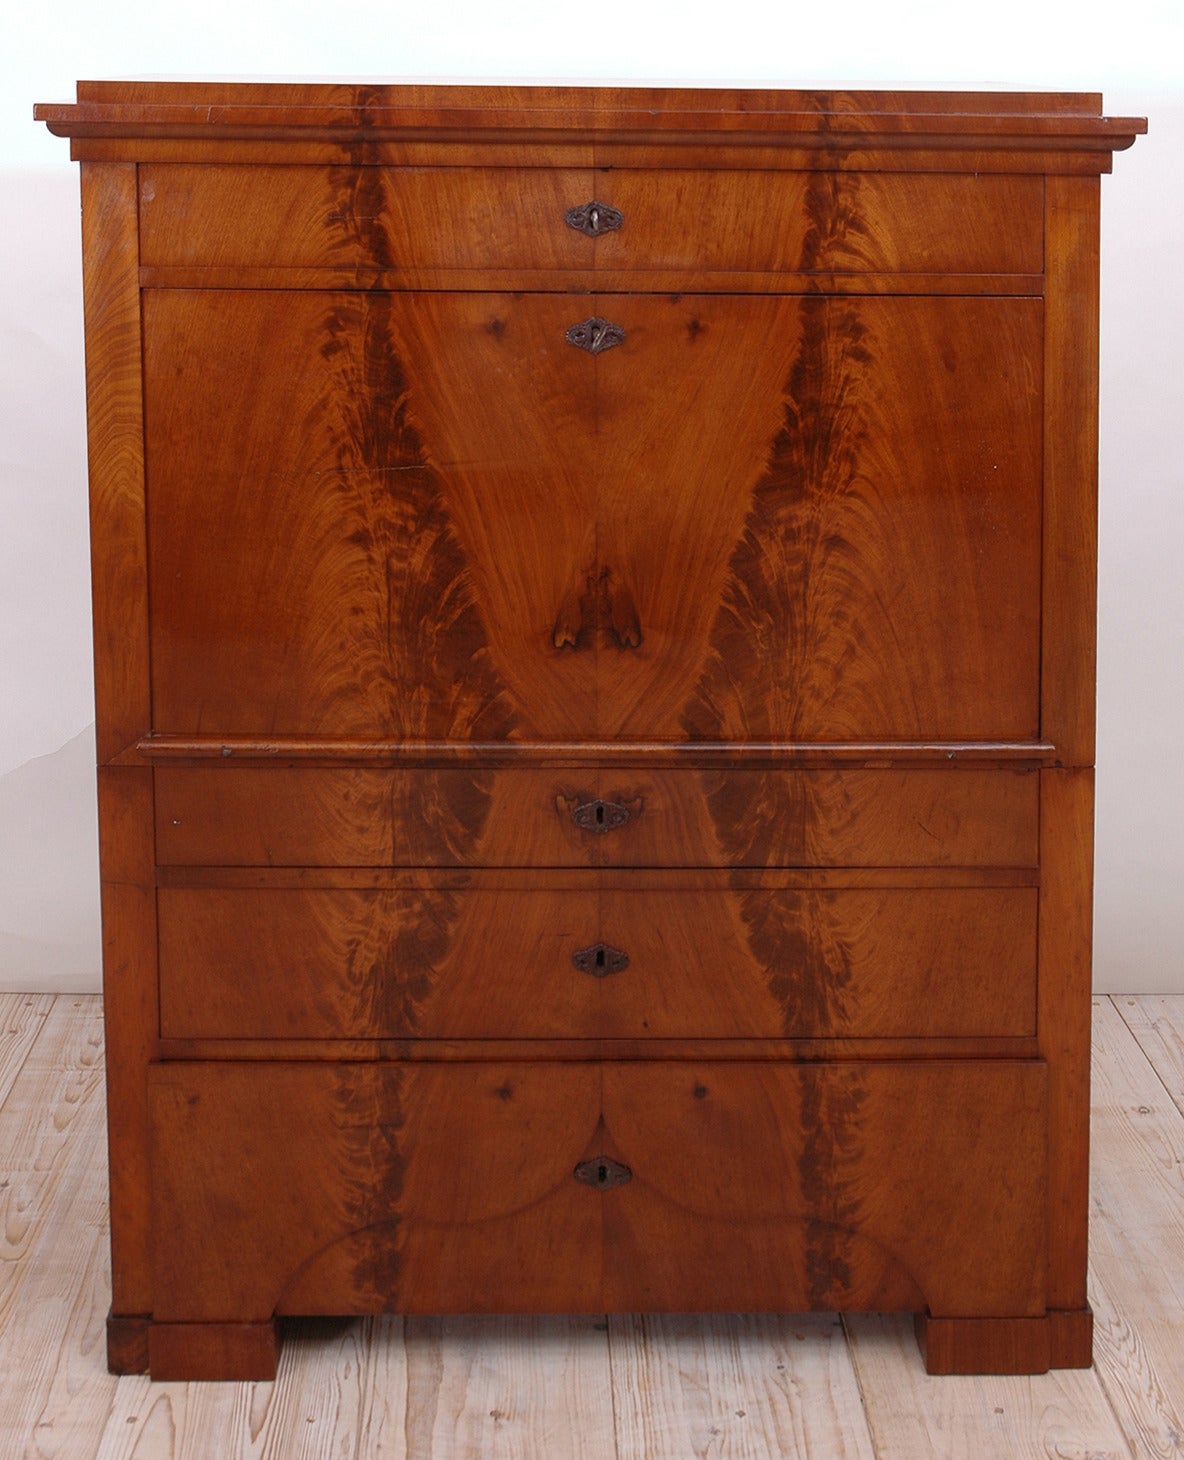 A very fine Biedermeier secretaire in beautifully book matched flame West Indies mahogany with fall-front opening to an ample desk surface with one long exterior drawer above, and three drawers below, each of staggered depths. The interior offers a